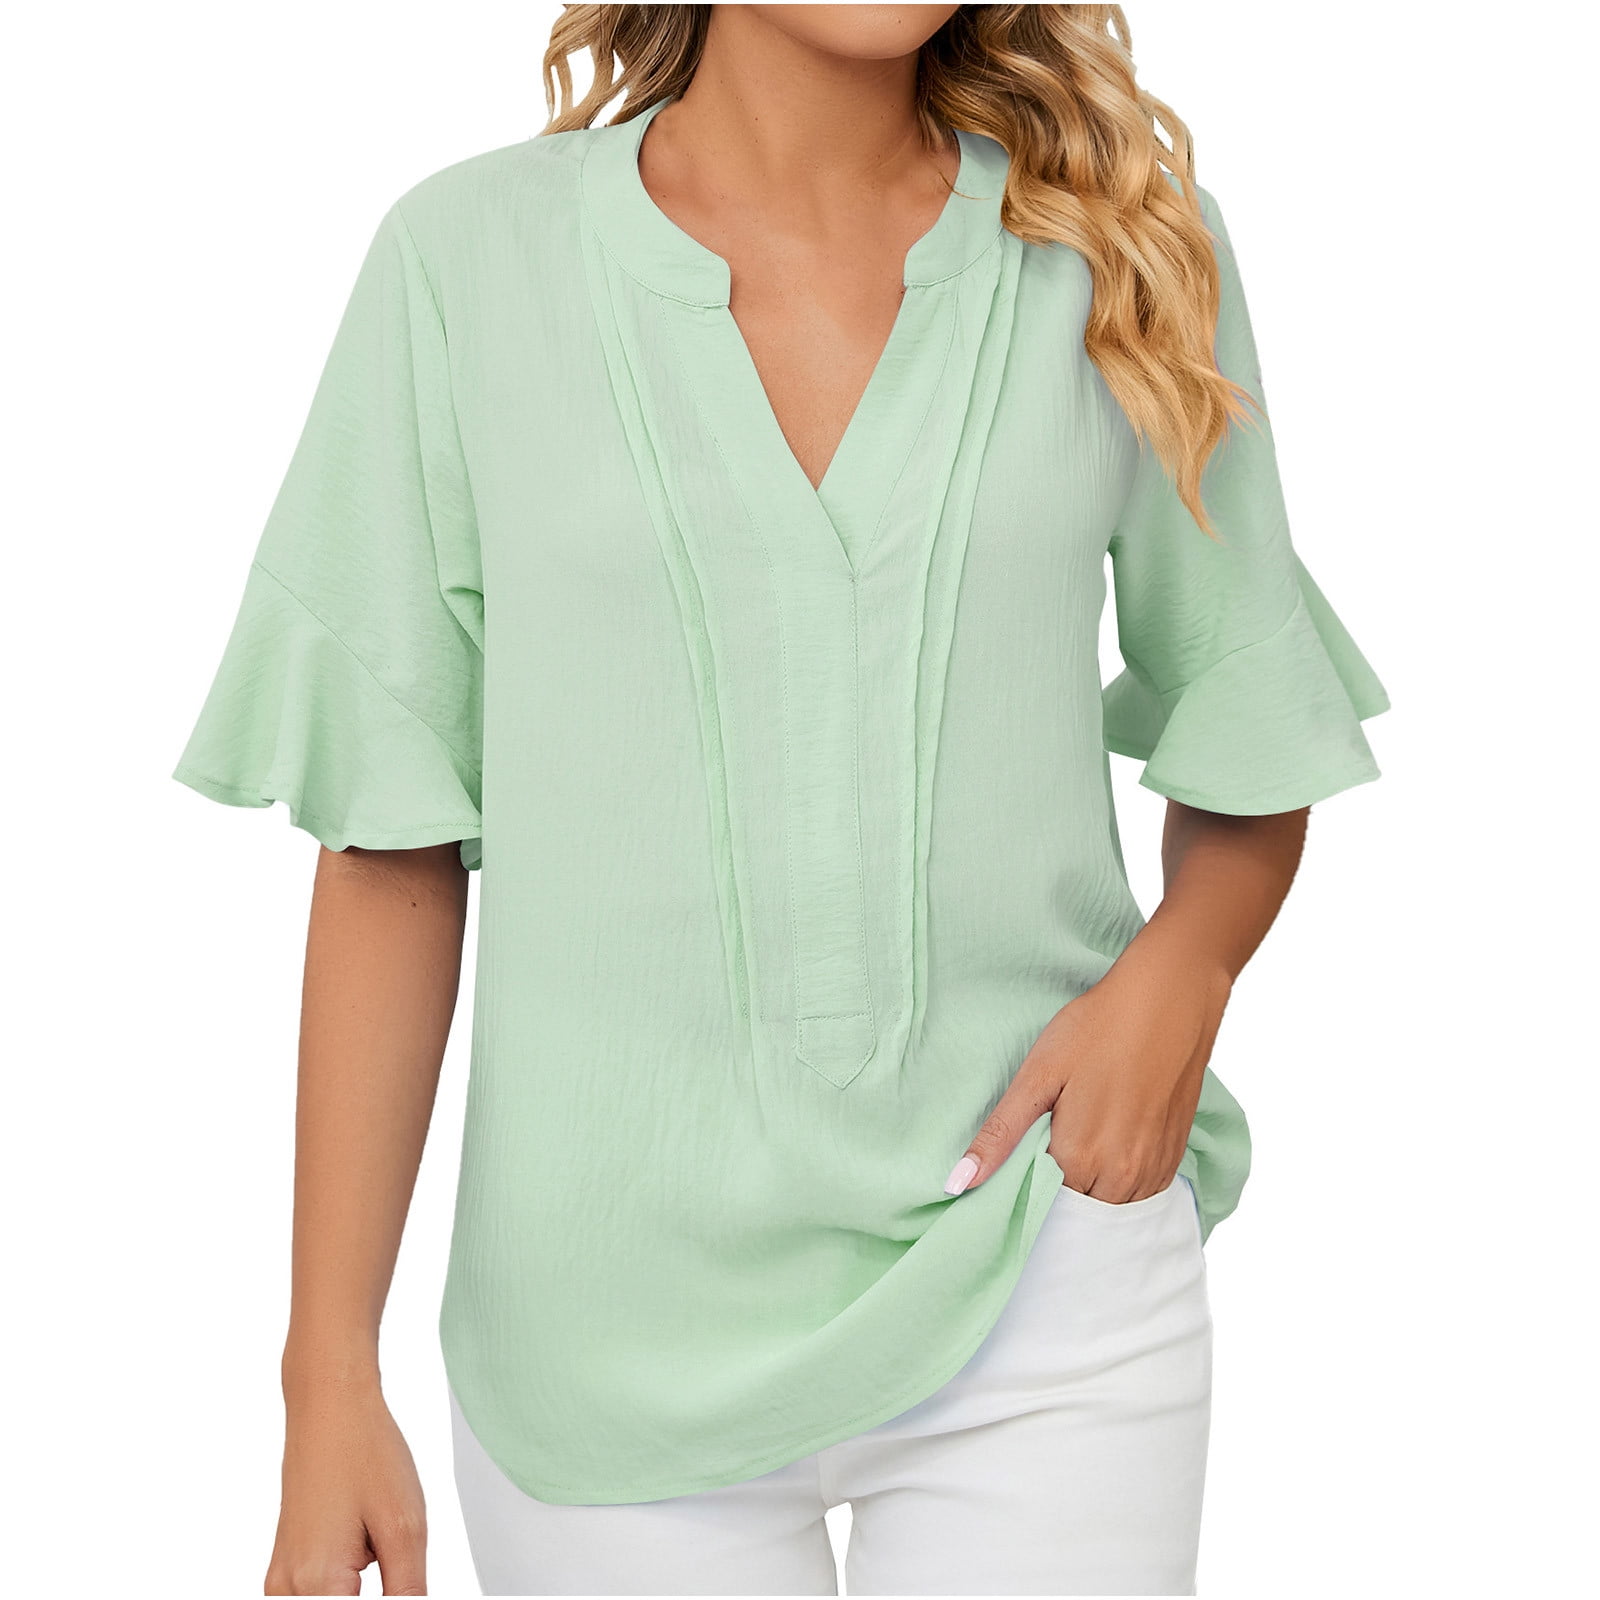  Womens Summer Tops Solid Flounce Sleeve Blouse (Color